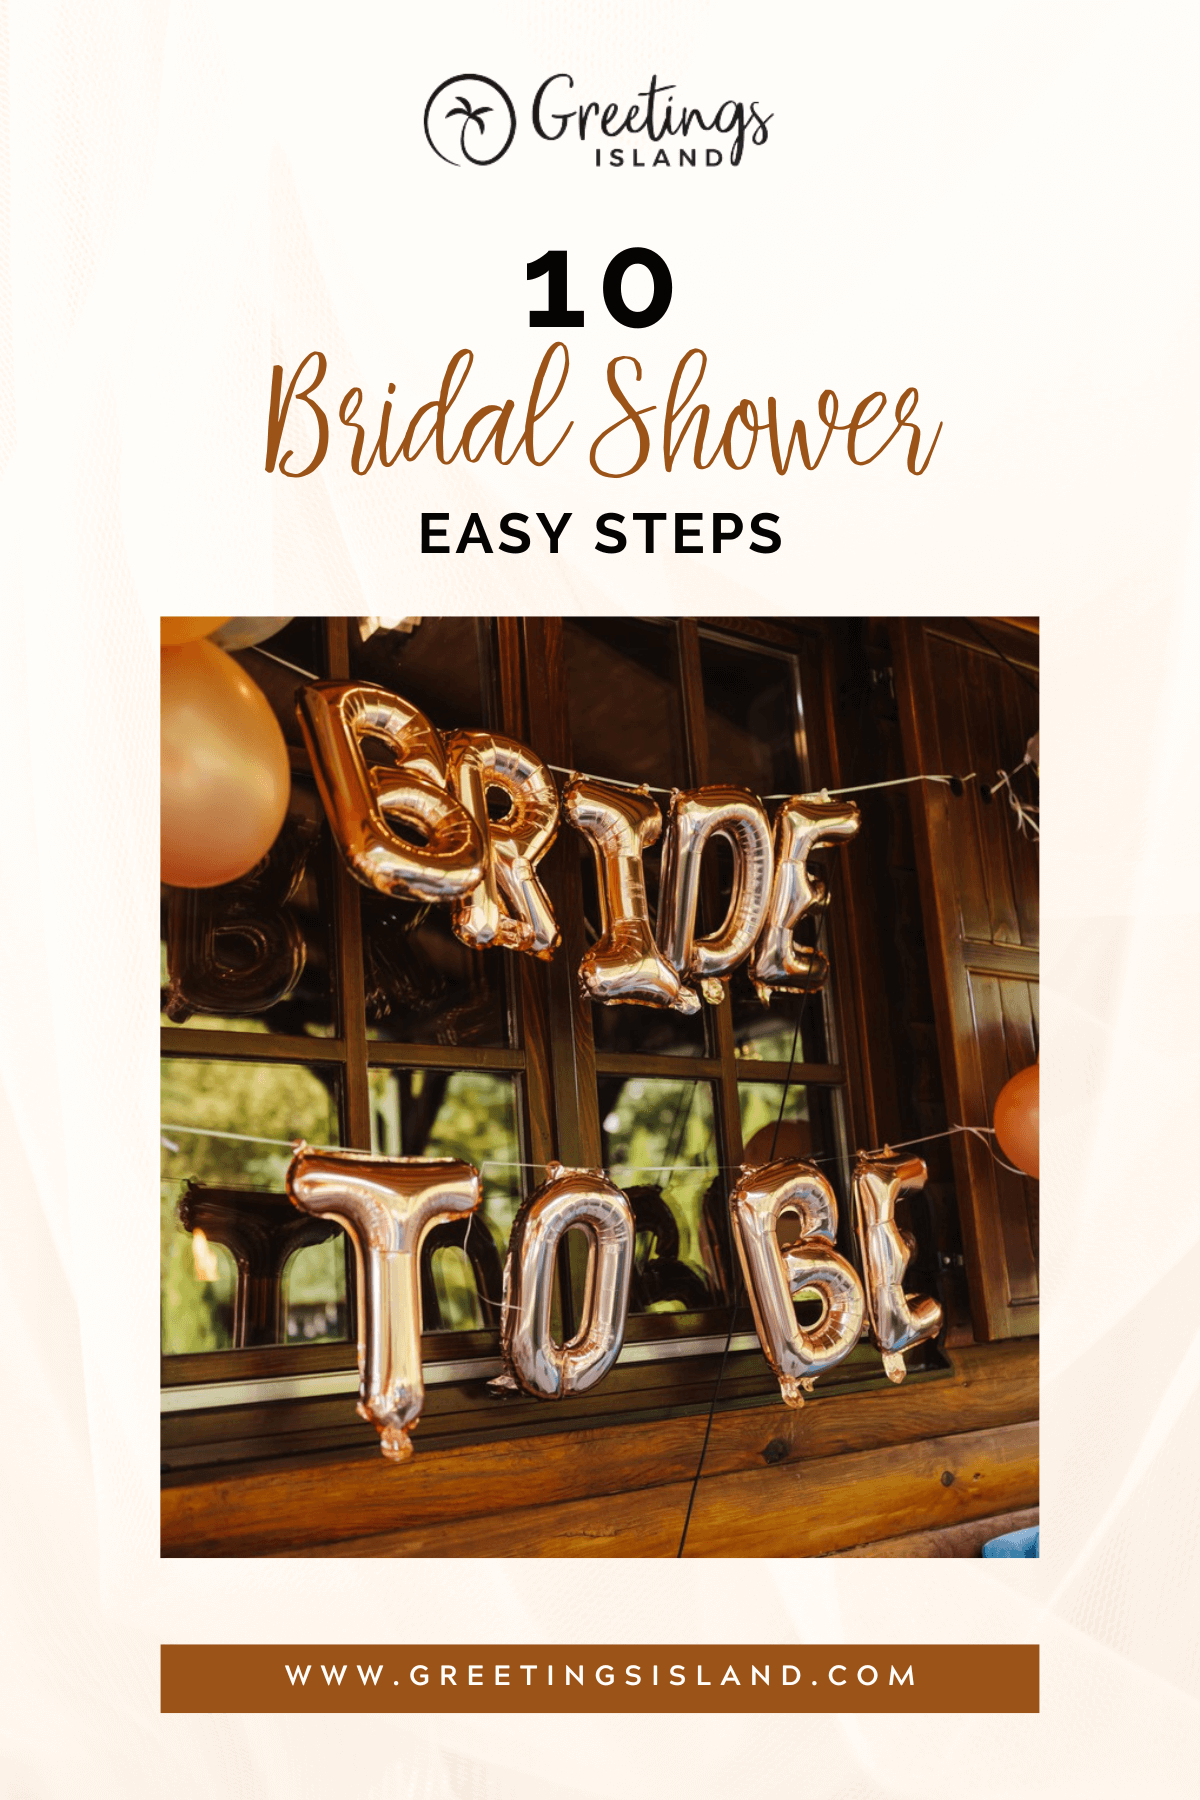 Throw The Best Bridal Shower With These 10 Easy Steps banner for Pinterest Pins